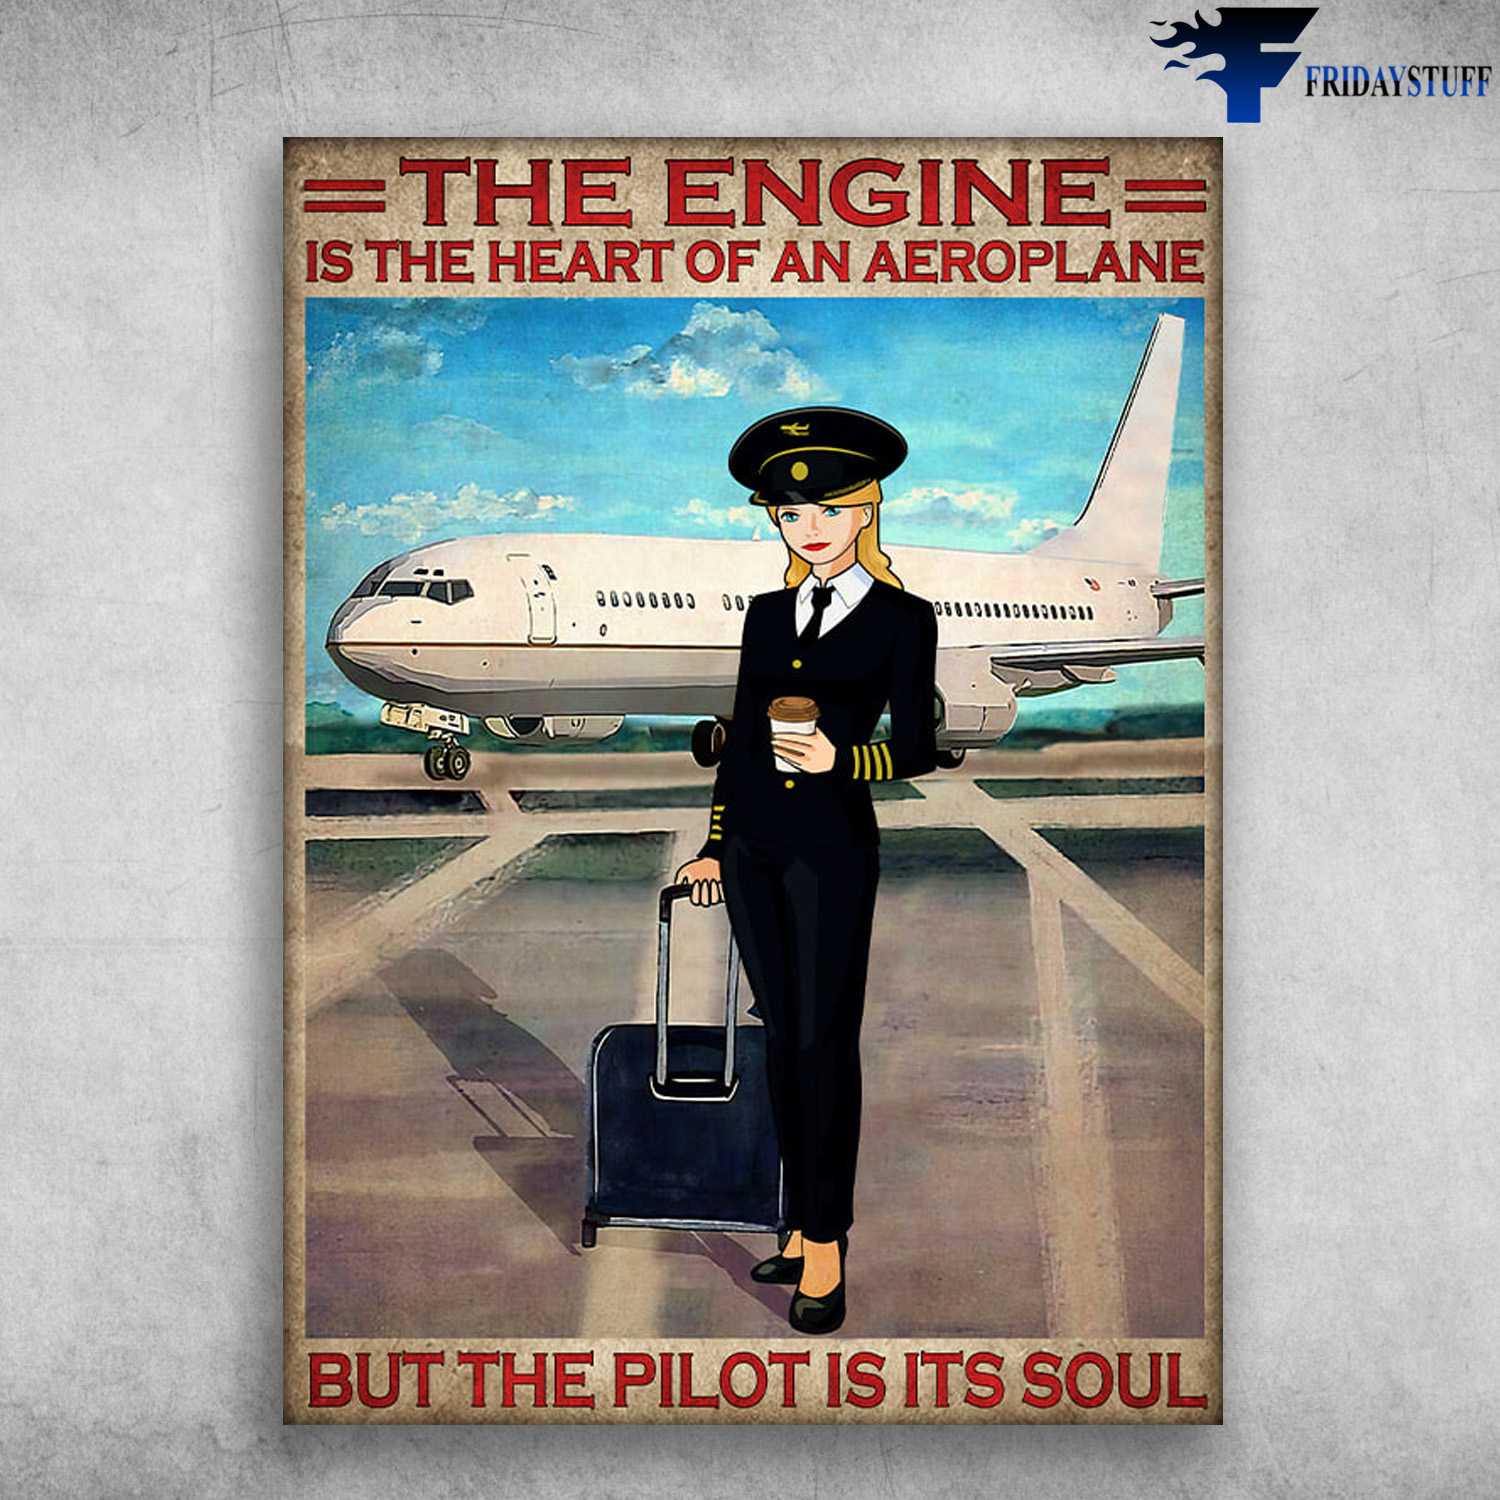 Pilot Poster, Female Pilot, The Engine, Is The Heart Of An Aeroplane, But The Pilot Is Its Soul